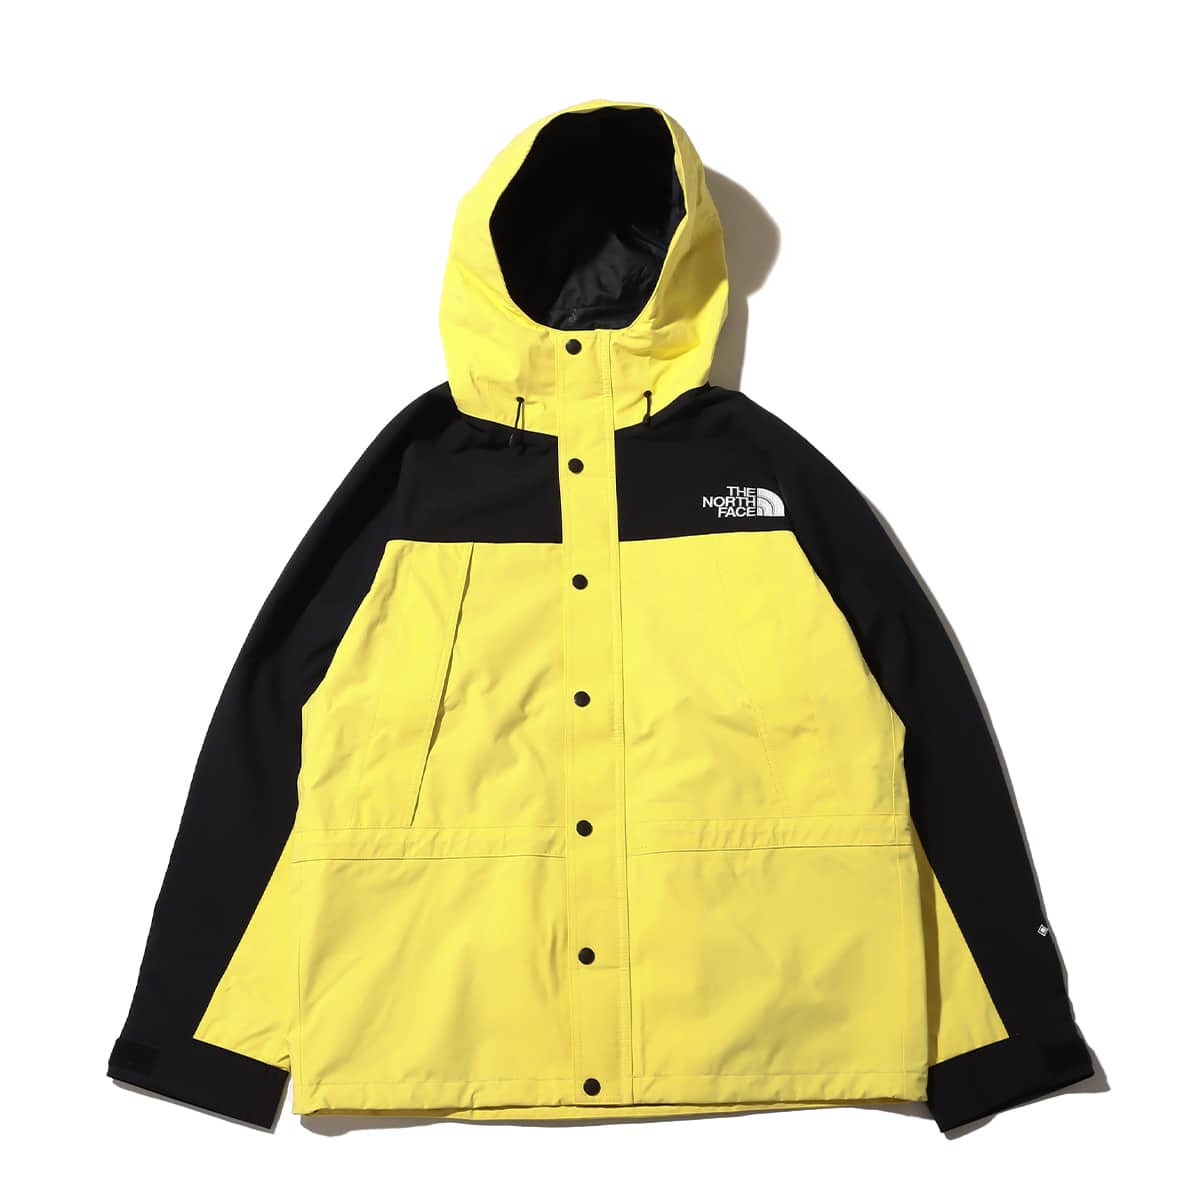 THE NORTH FACE MOUNTAIN LIGHT JACKET イエローテール 22FW-I_photo_large